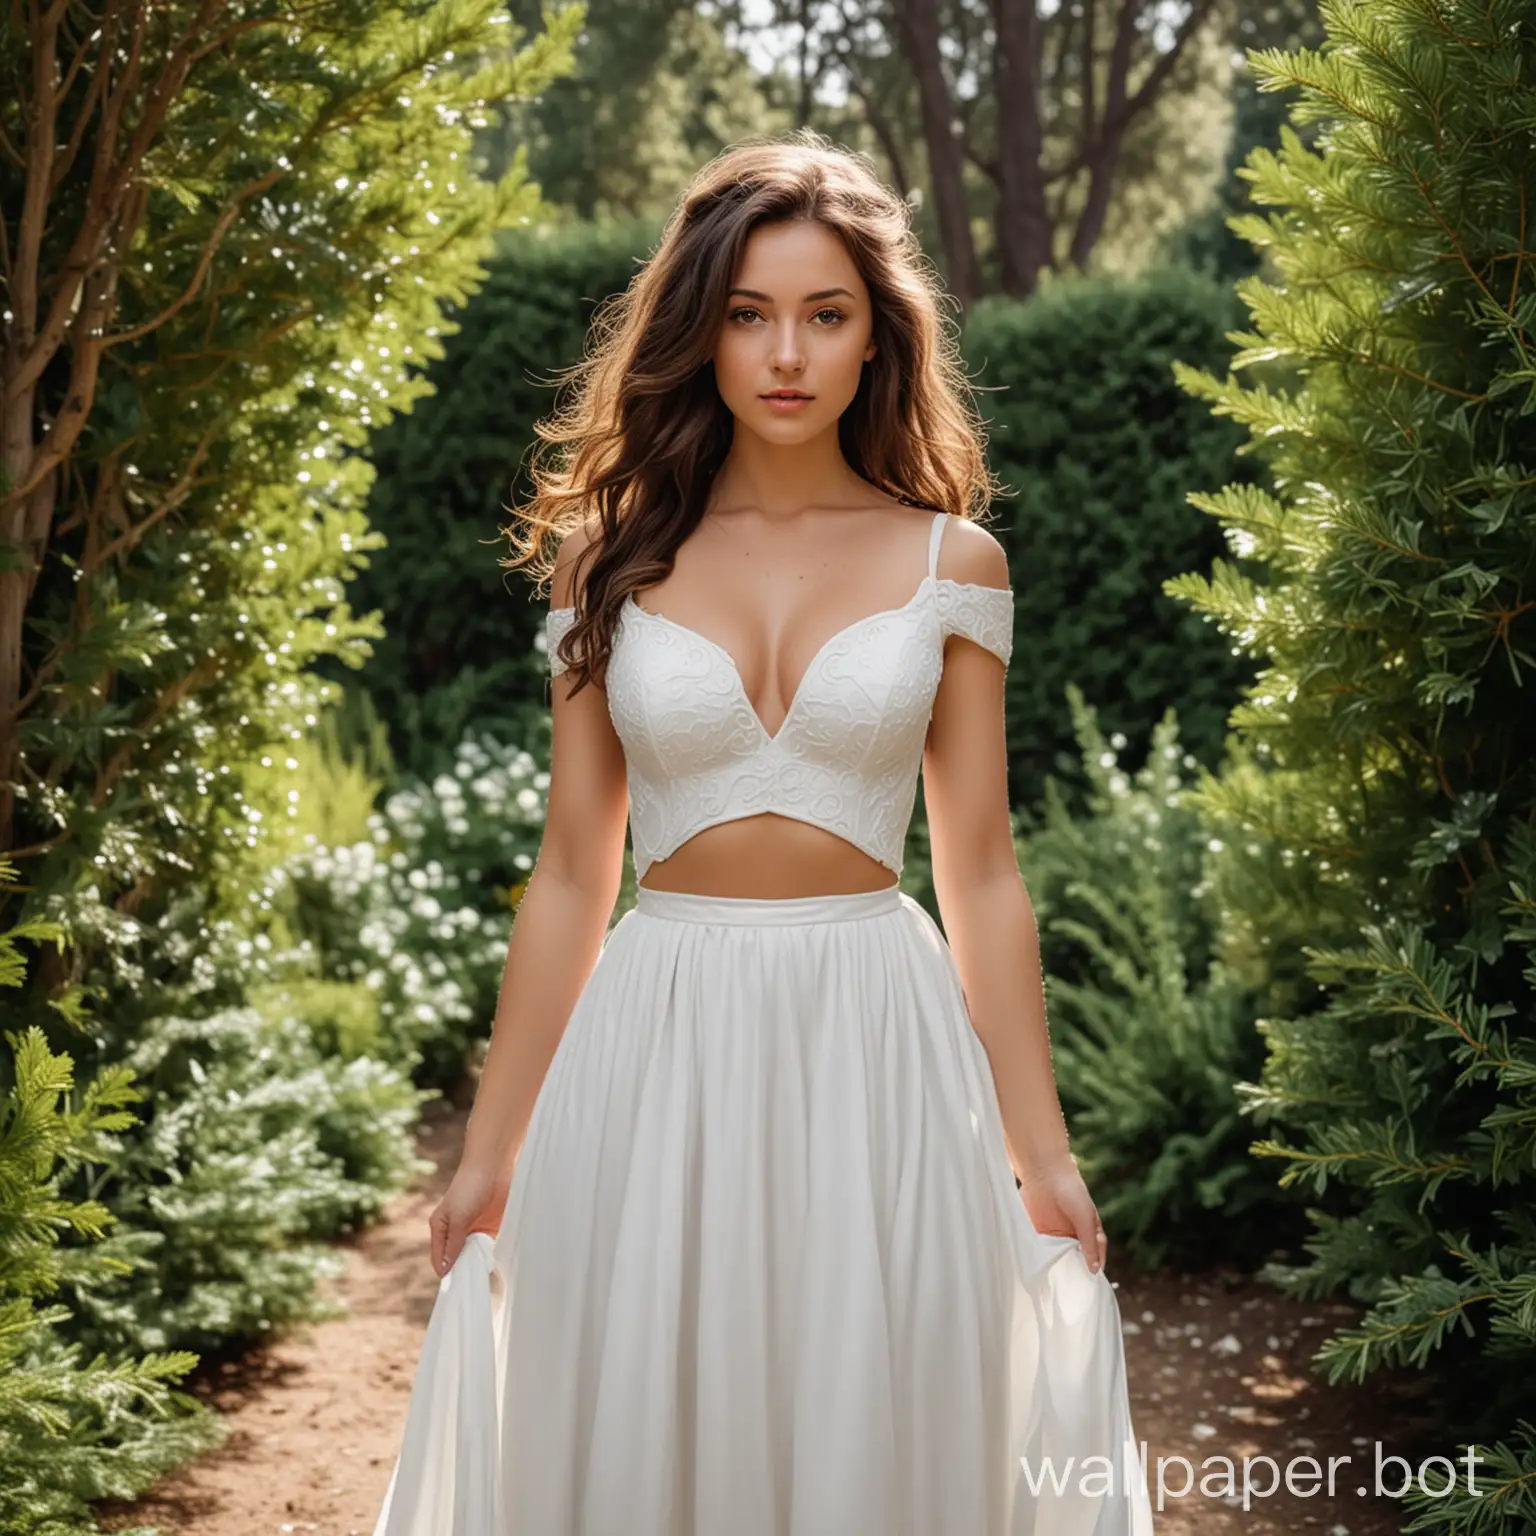 A petite brunette girl in a white wedding dress with cutouts for her breasts in a garden with evergreen trees on the side